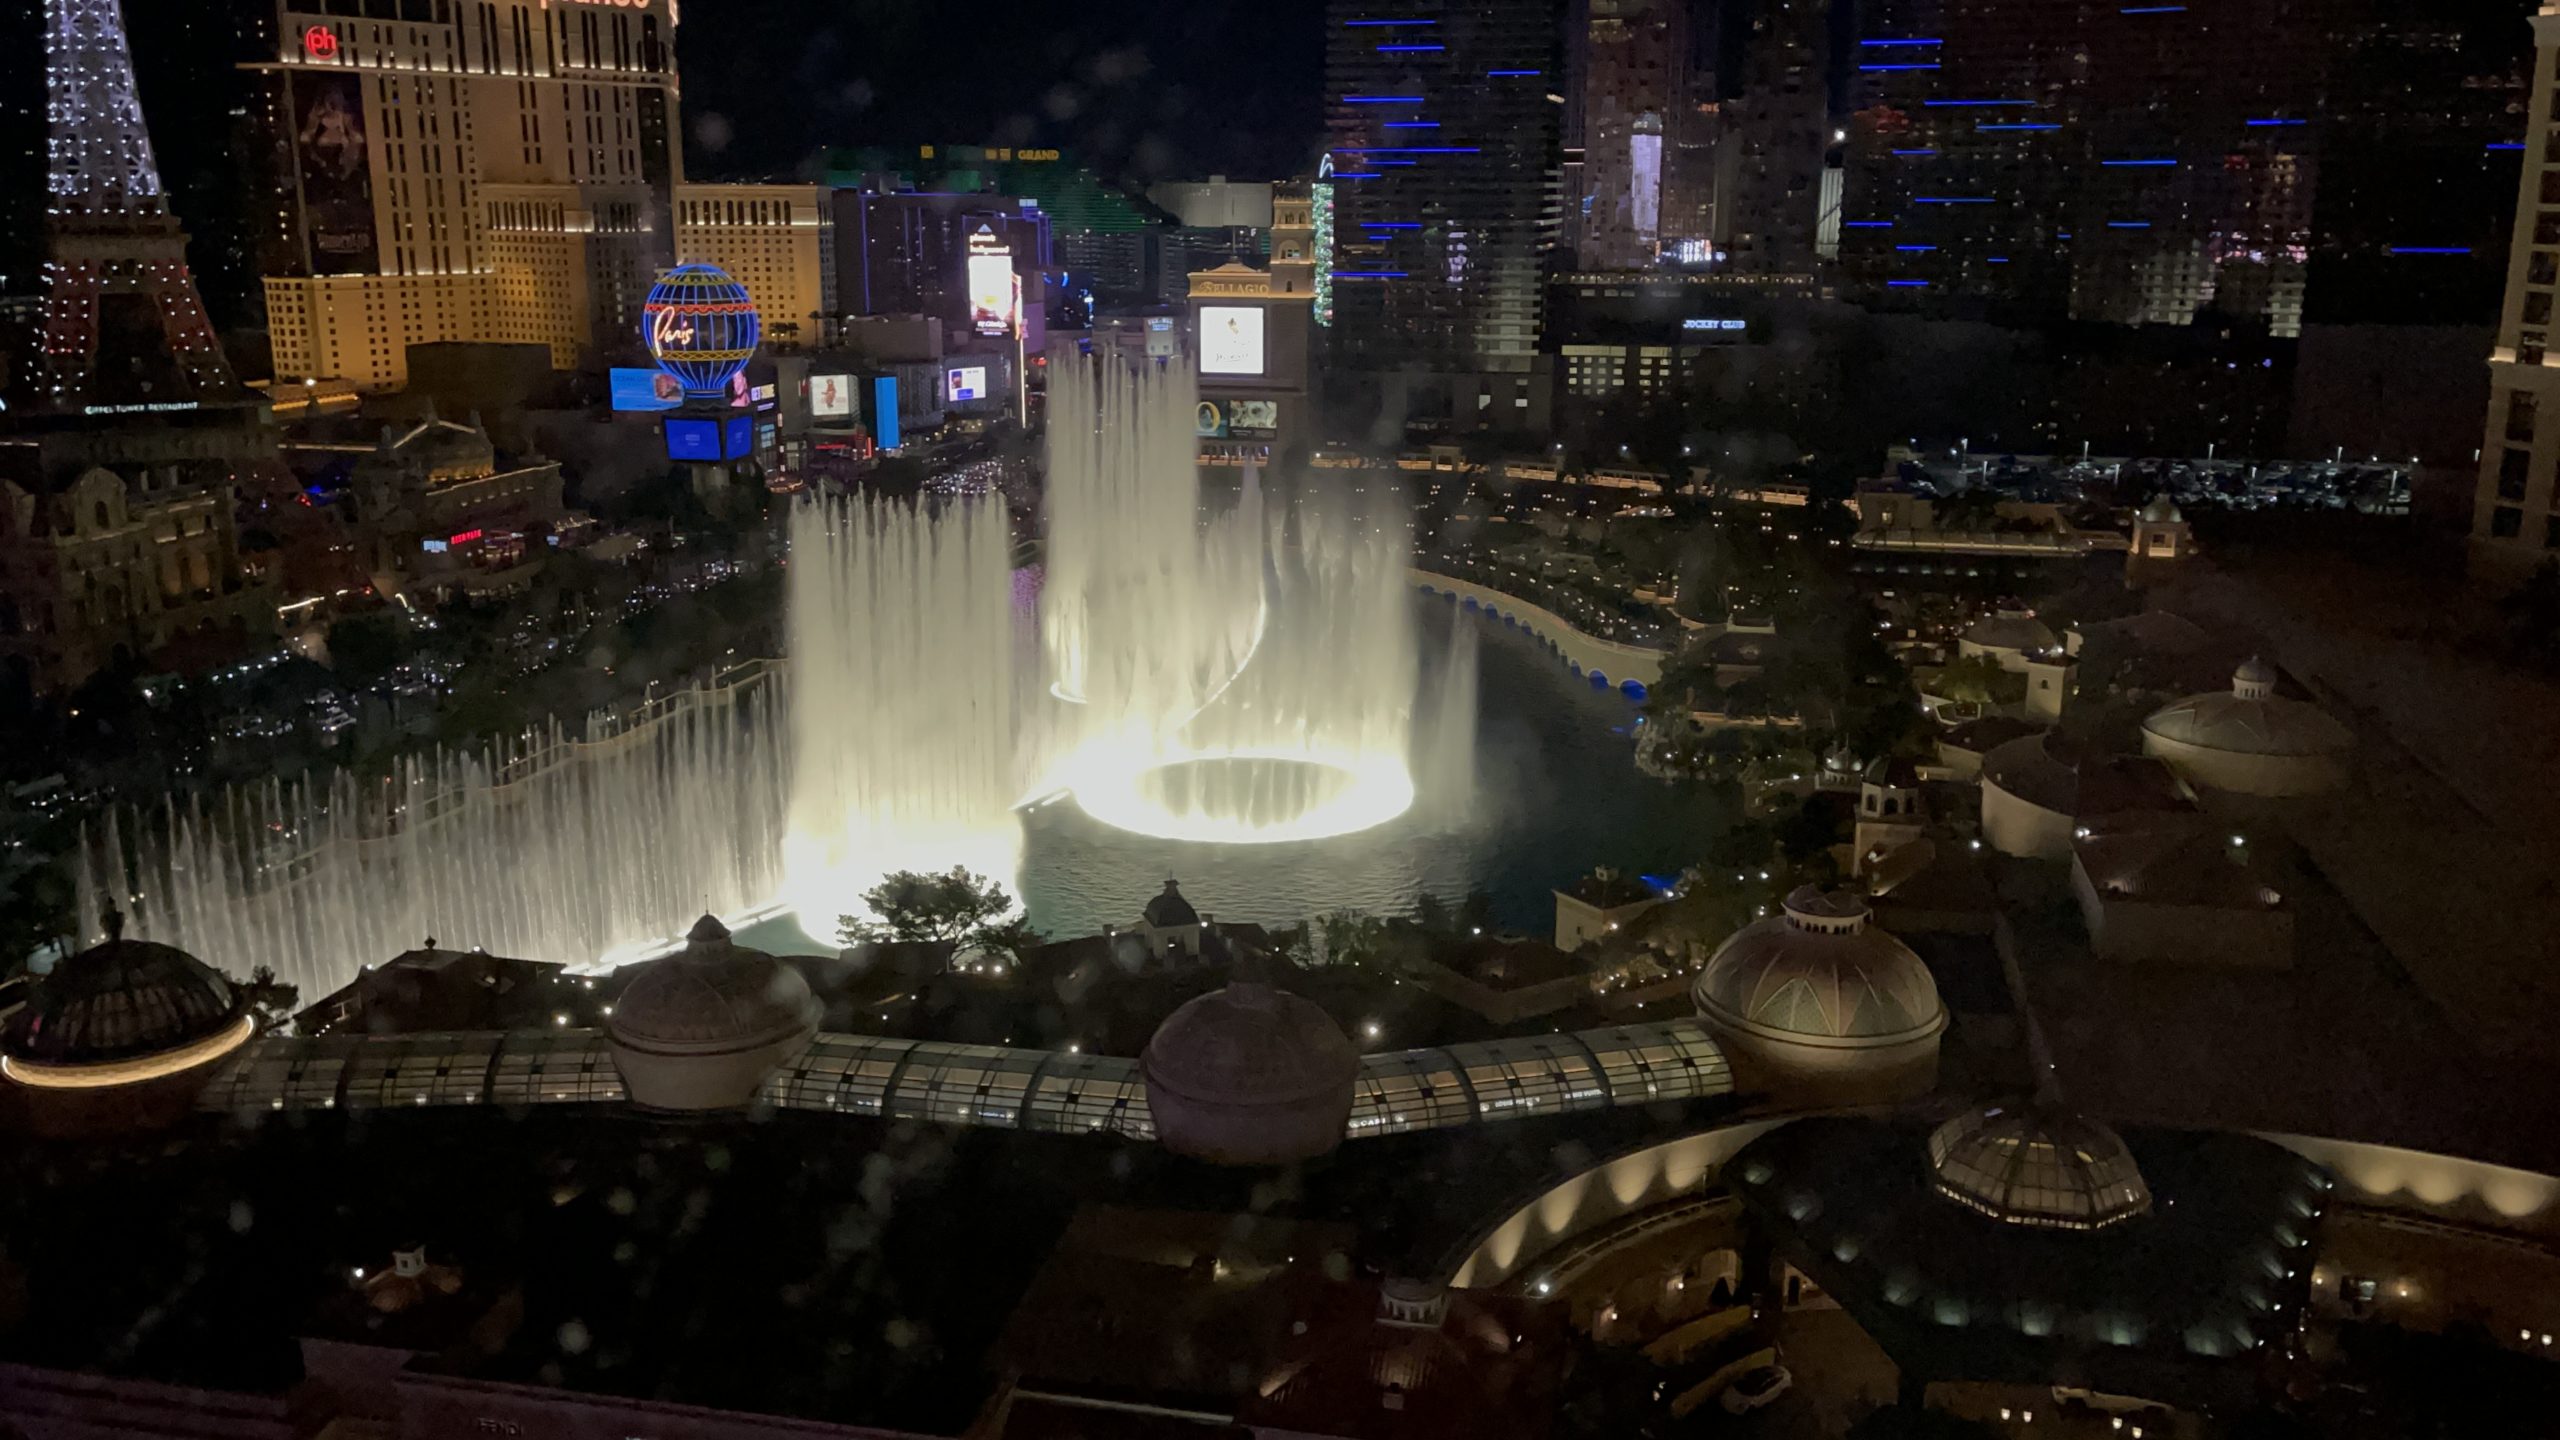 The 6 Towers at Caesars Palace: Which is the Best?